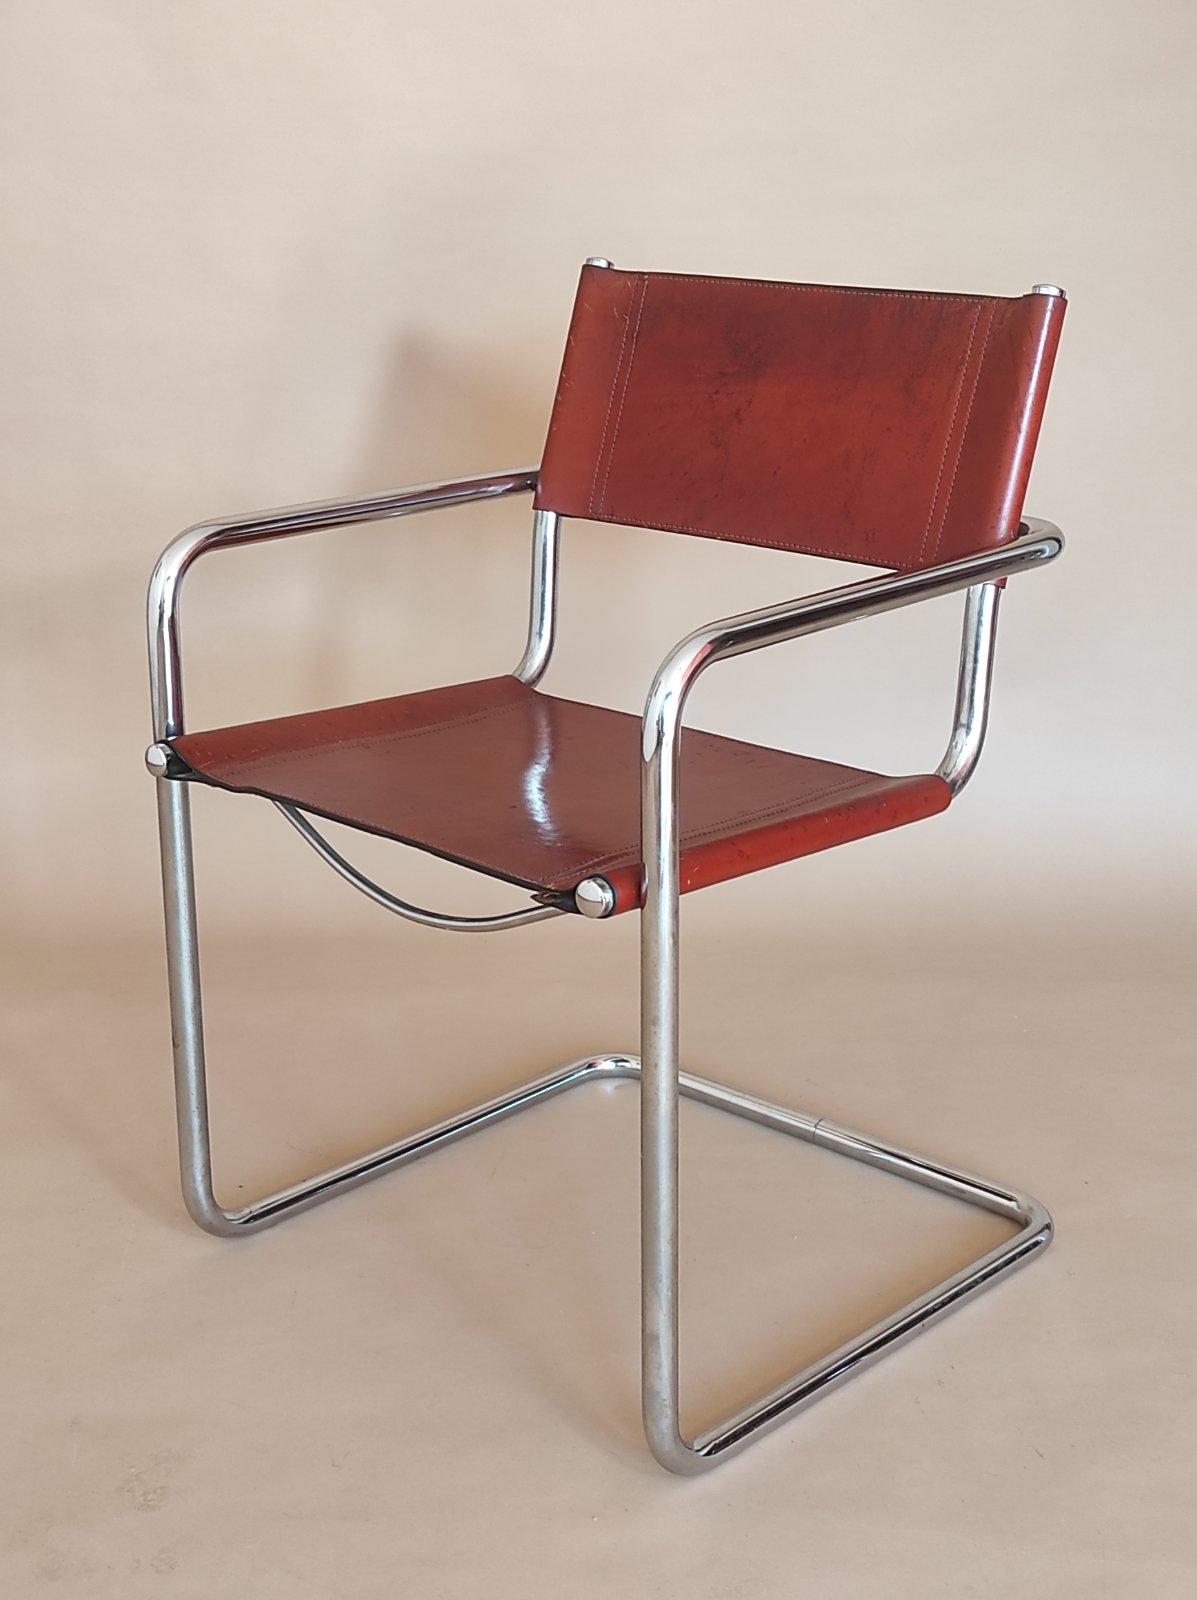 Titi Agnoli Cantilever Leather Chair for UNIFOR Italy 1970s For Sale 1